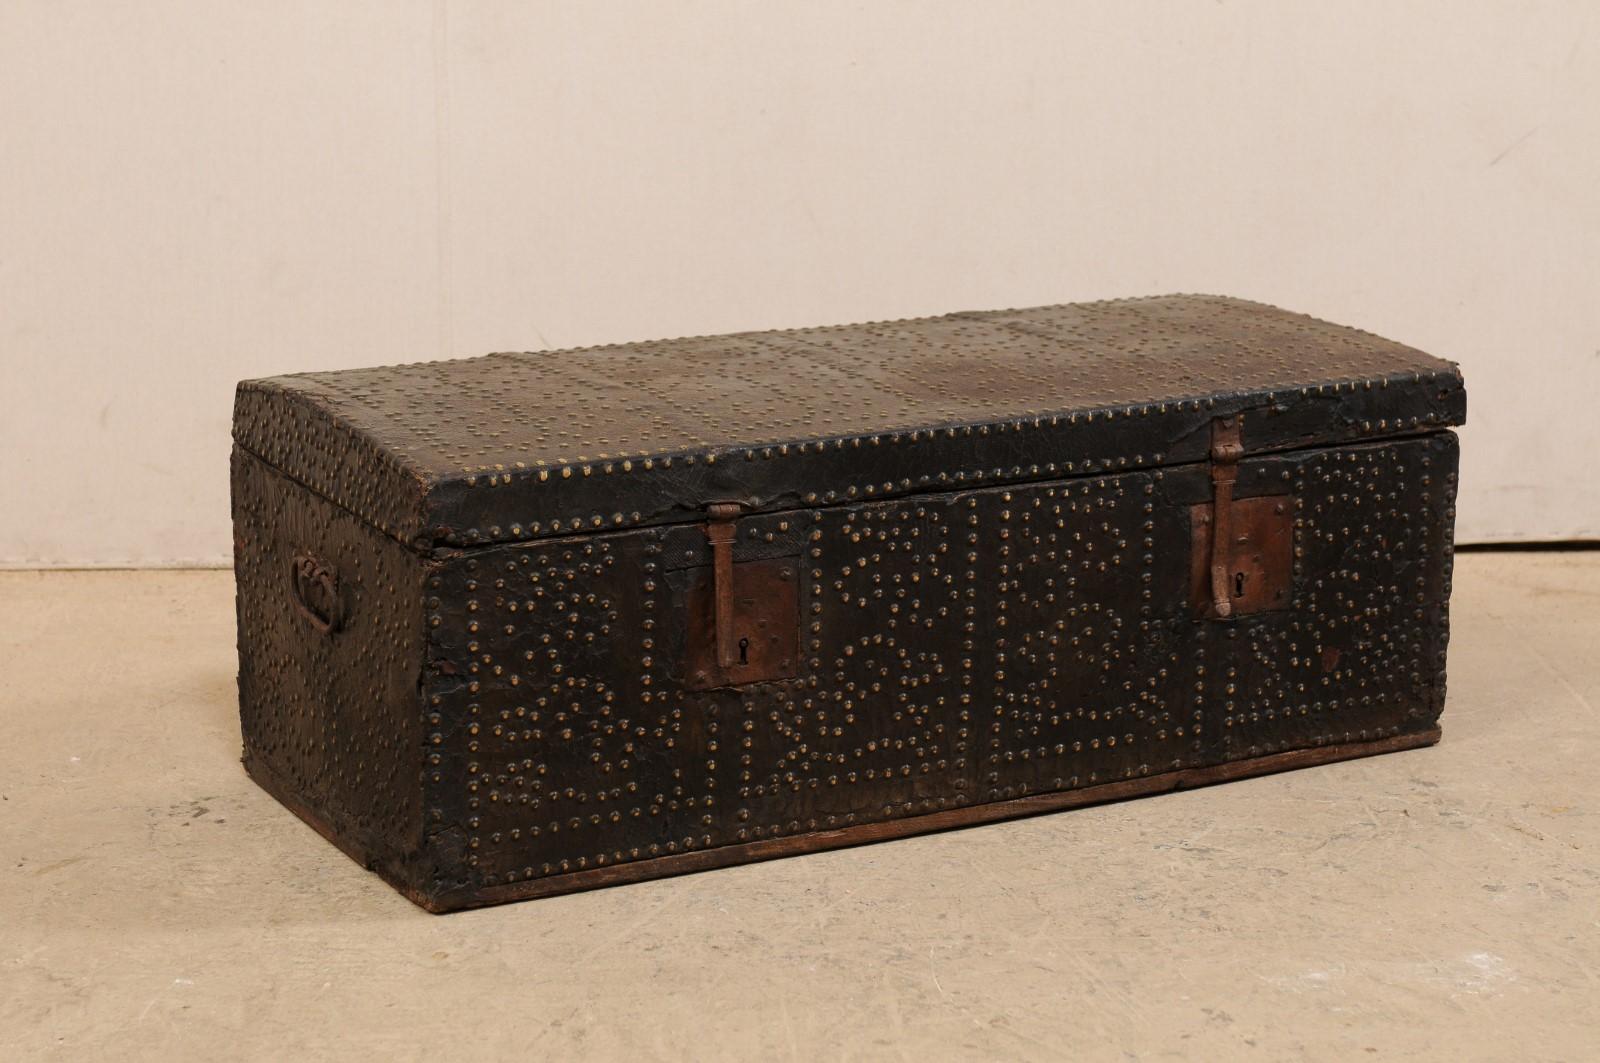 A Spanish Baroque leather-wrapped coffer brass accents from the 18th century. This antique Spanish coffer, with it's rectangular-shaped body, has been ornately decorated with nail head brass studs (which have a dark patina from age) along the top,